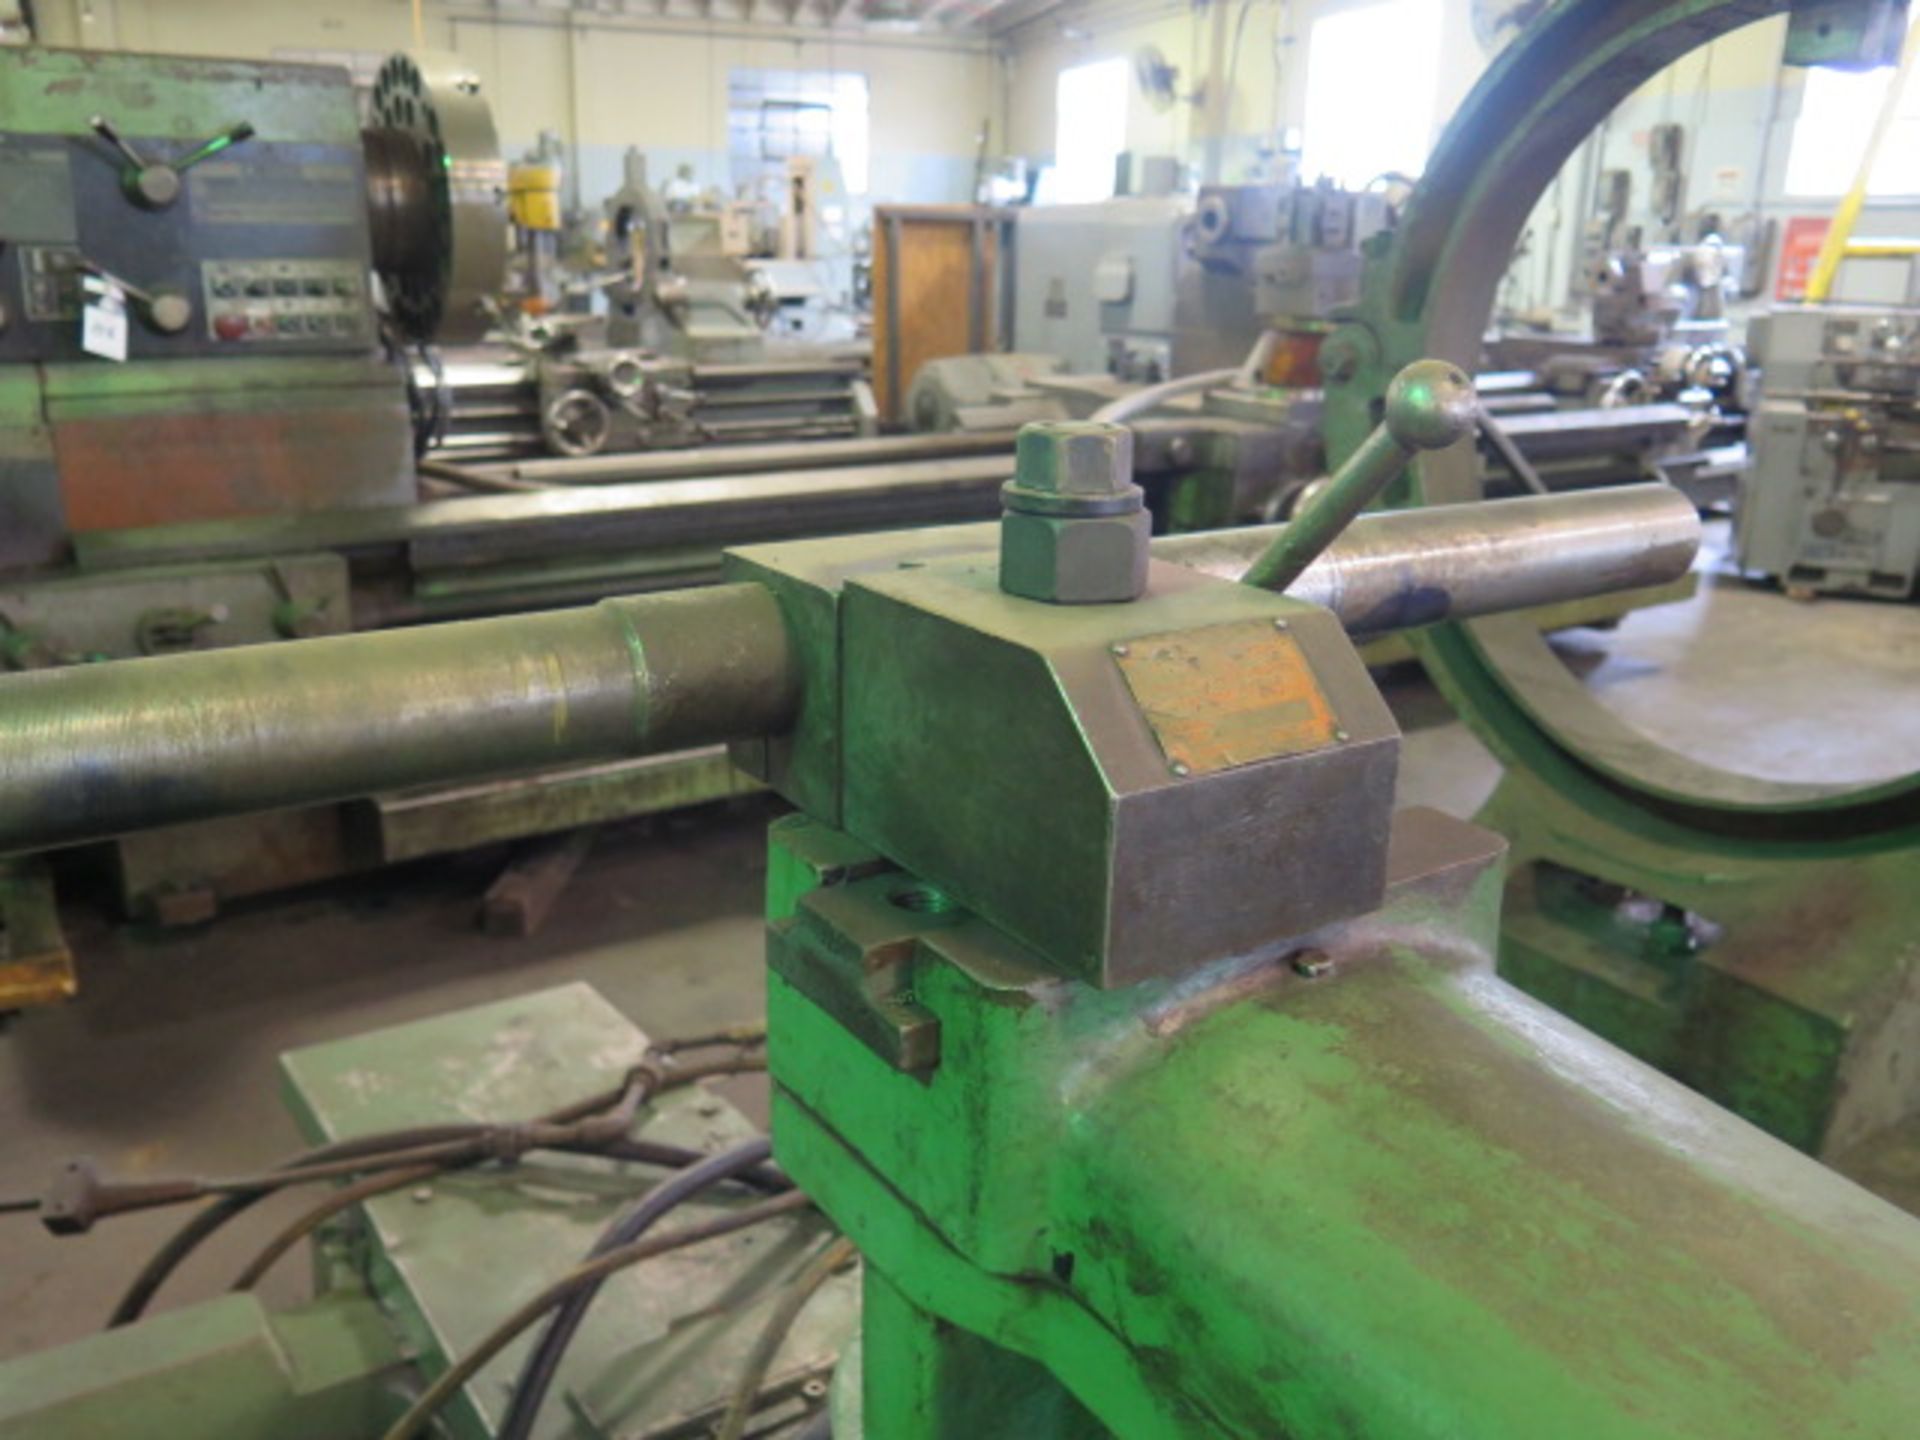 Niles A54P 62” x 140” Lathe s/n 23579 w/ 3.94-232 RPM, Inch Threading, Steady Rest, SOLD AS IS - Image 13 of 20